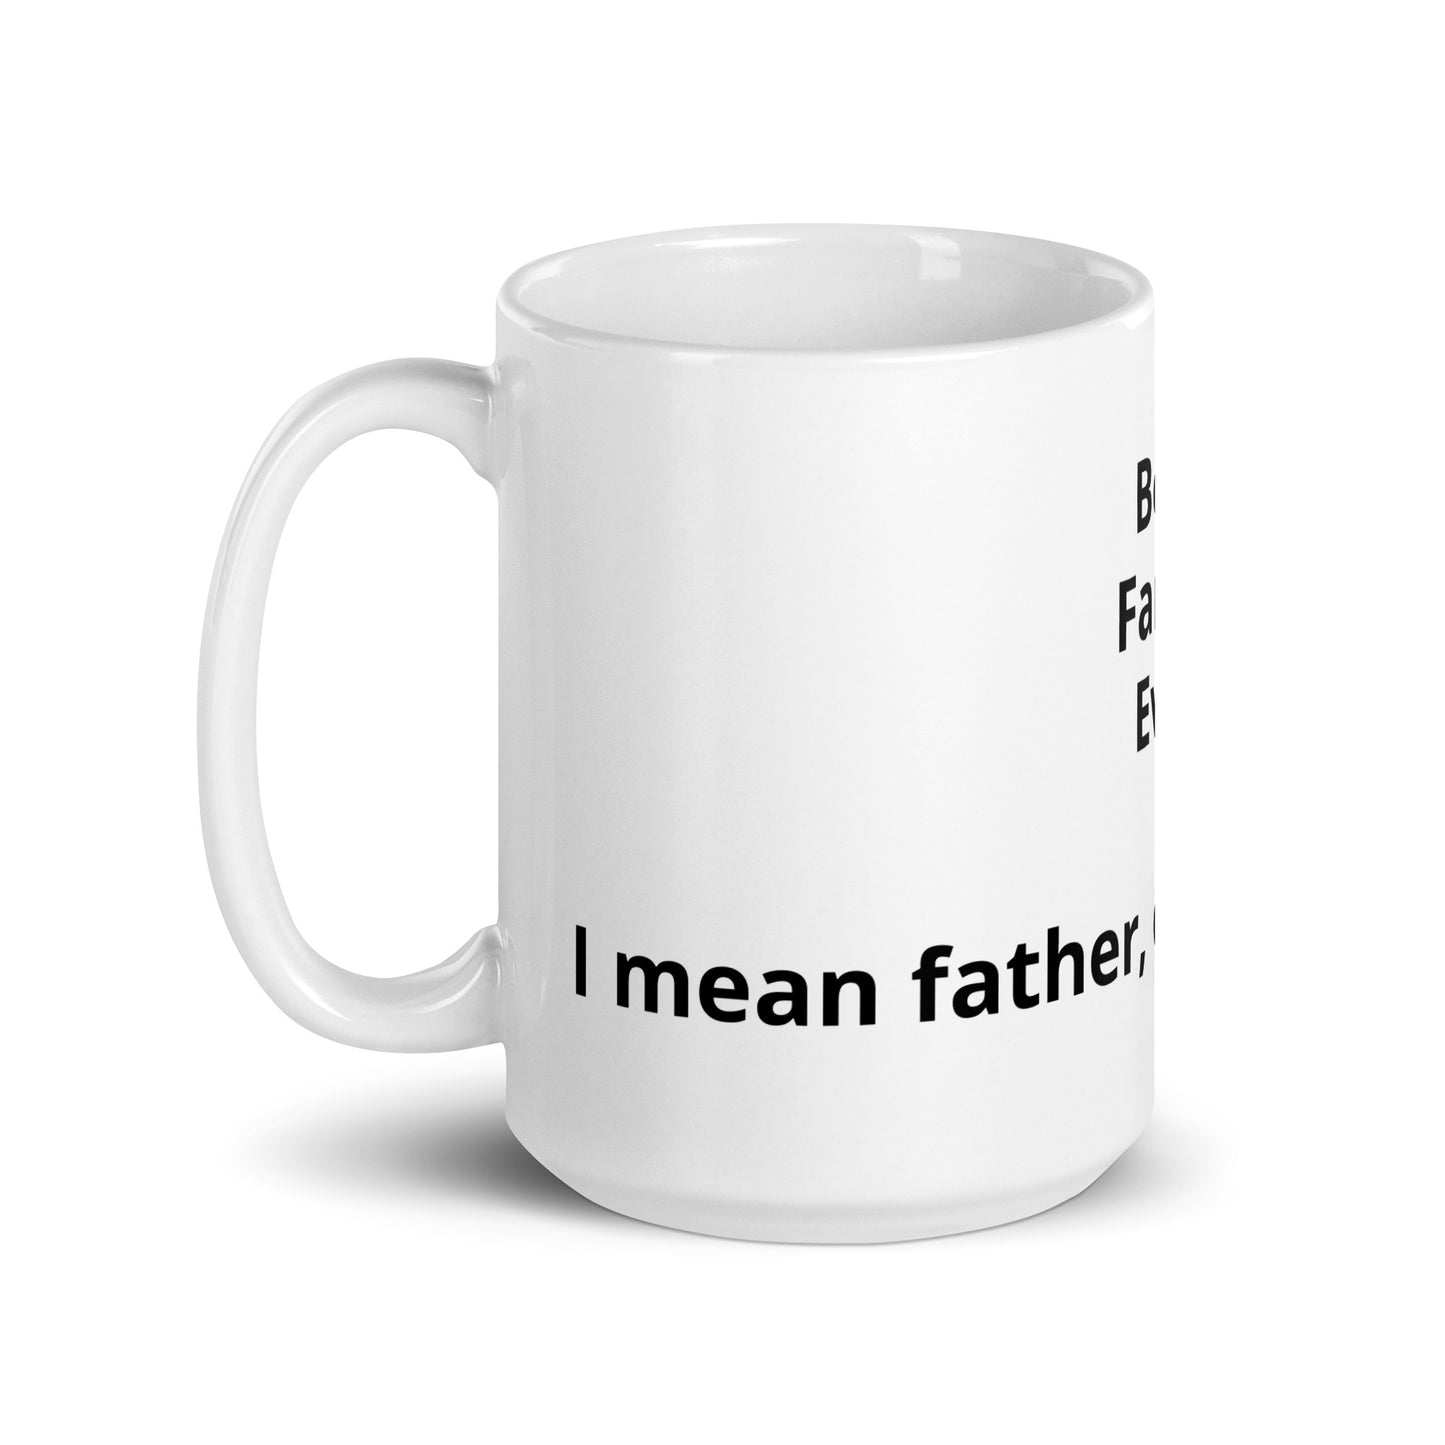 Best Farter (Father) Ever | White glossy coffee mug | Great gift for Dad